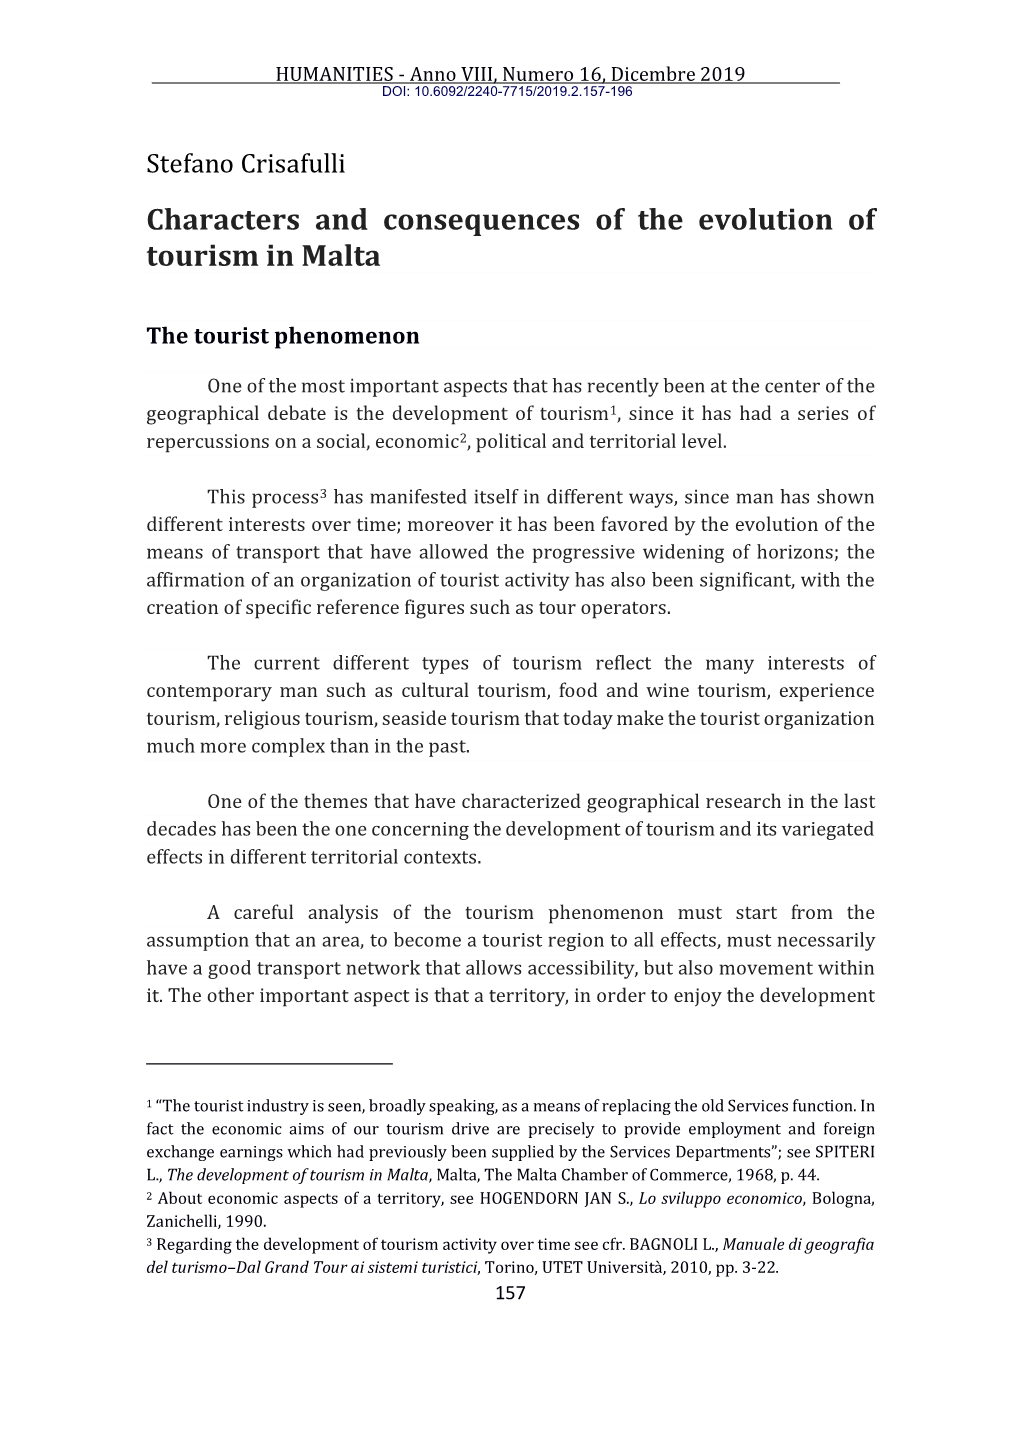 Characters and Consequences of the Evolution of Tourism in Malta